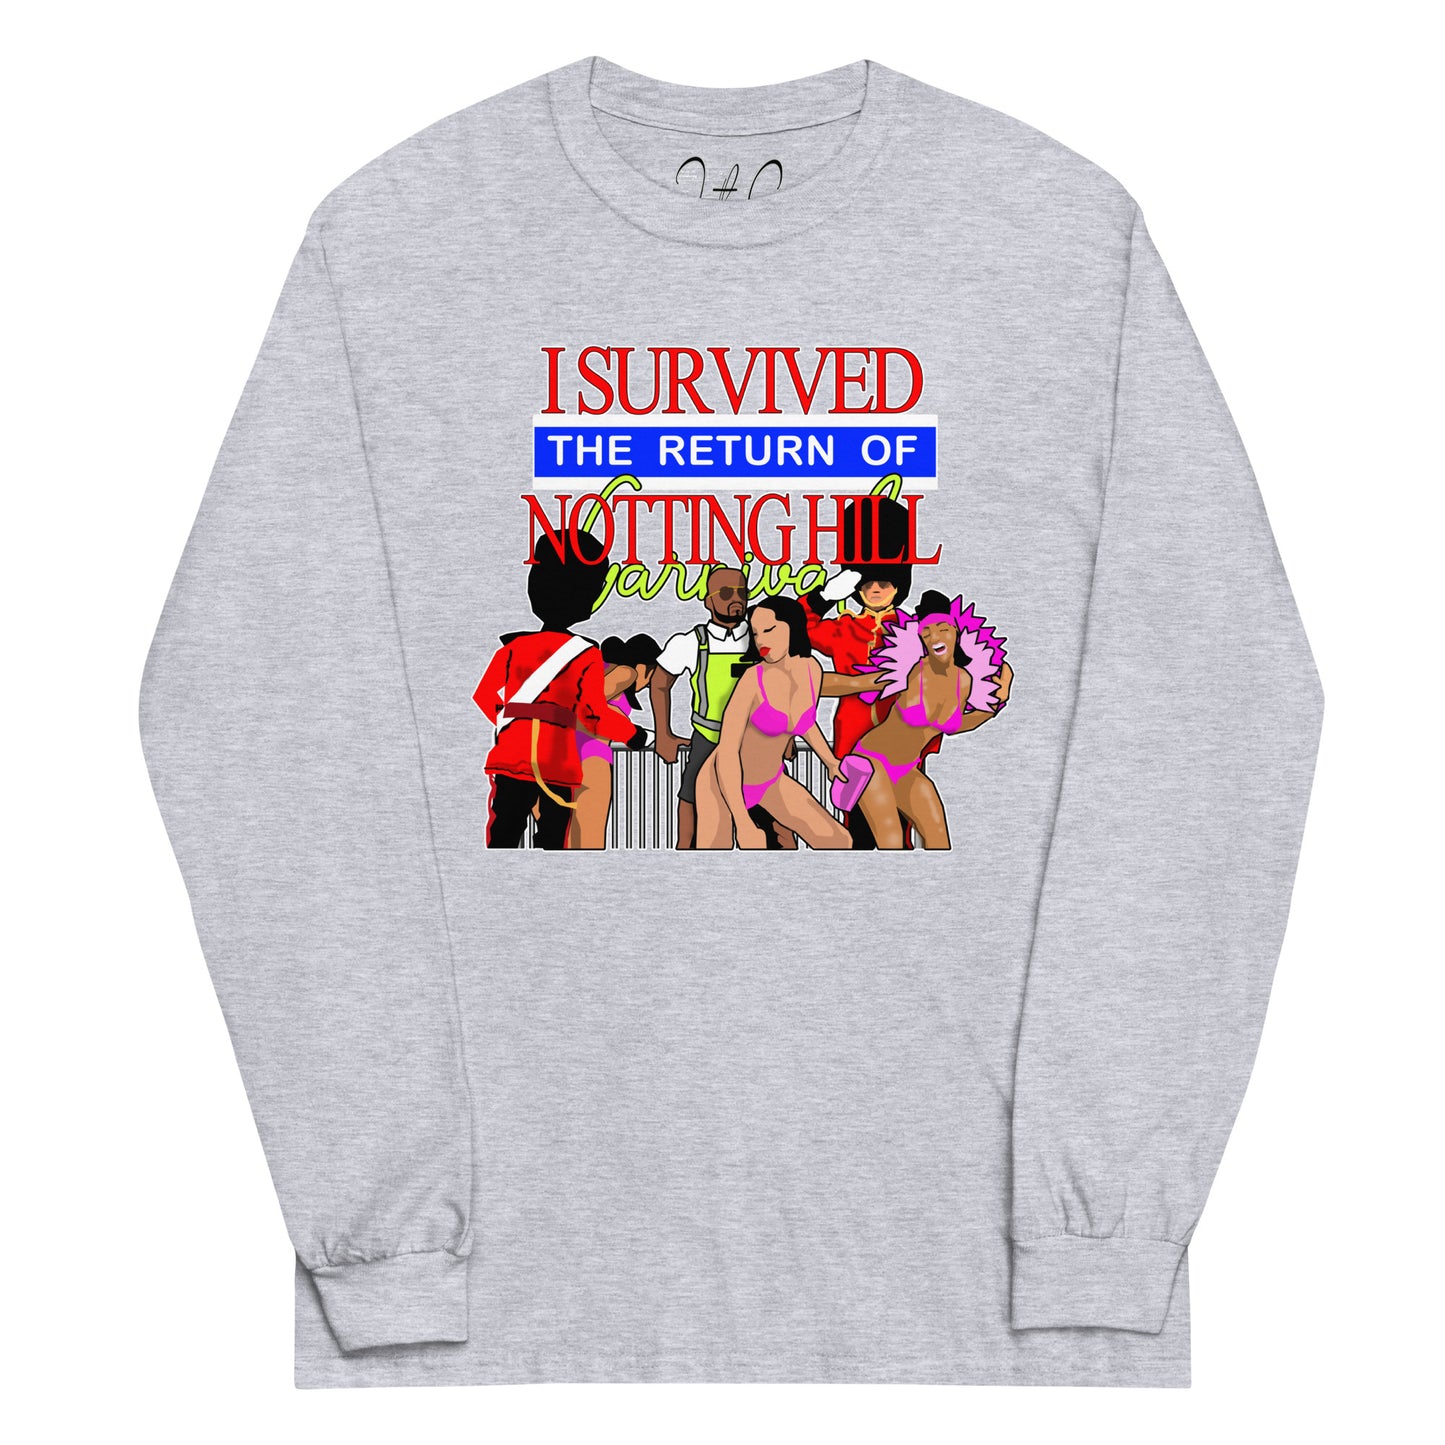 I Survived Notting Hill ( long sleeve)